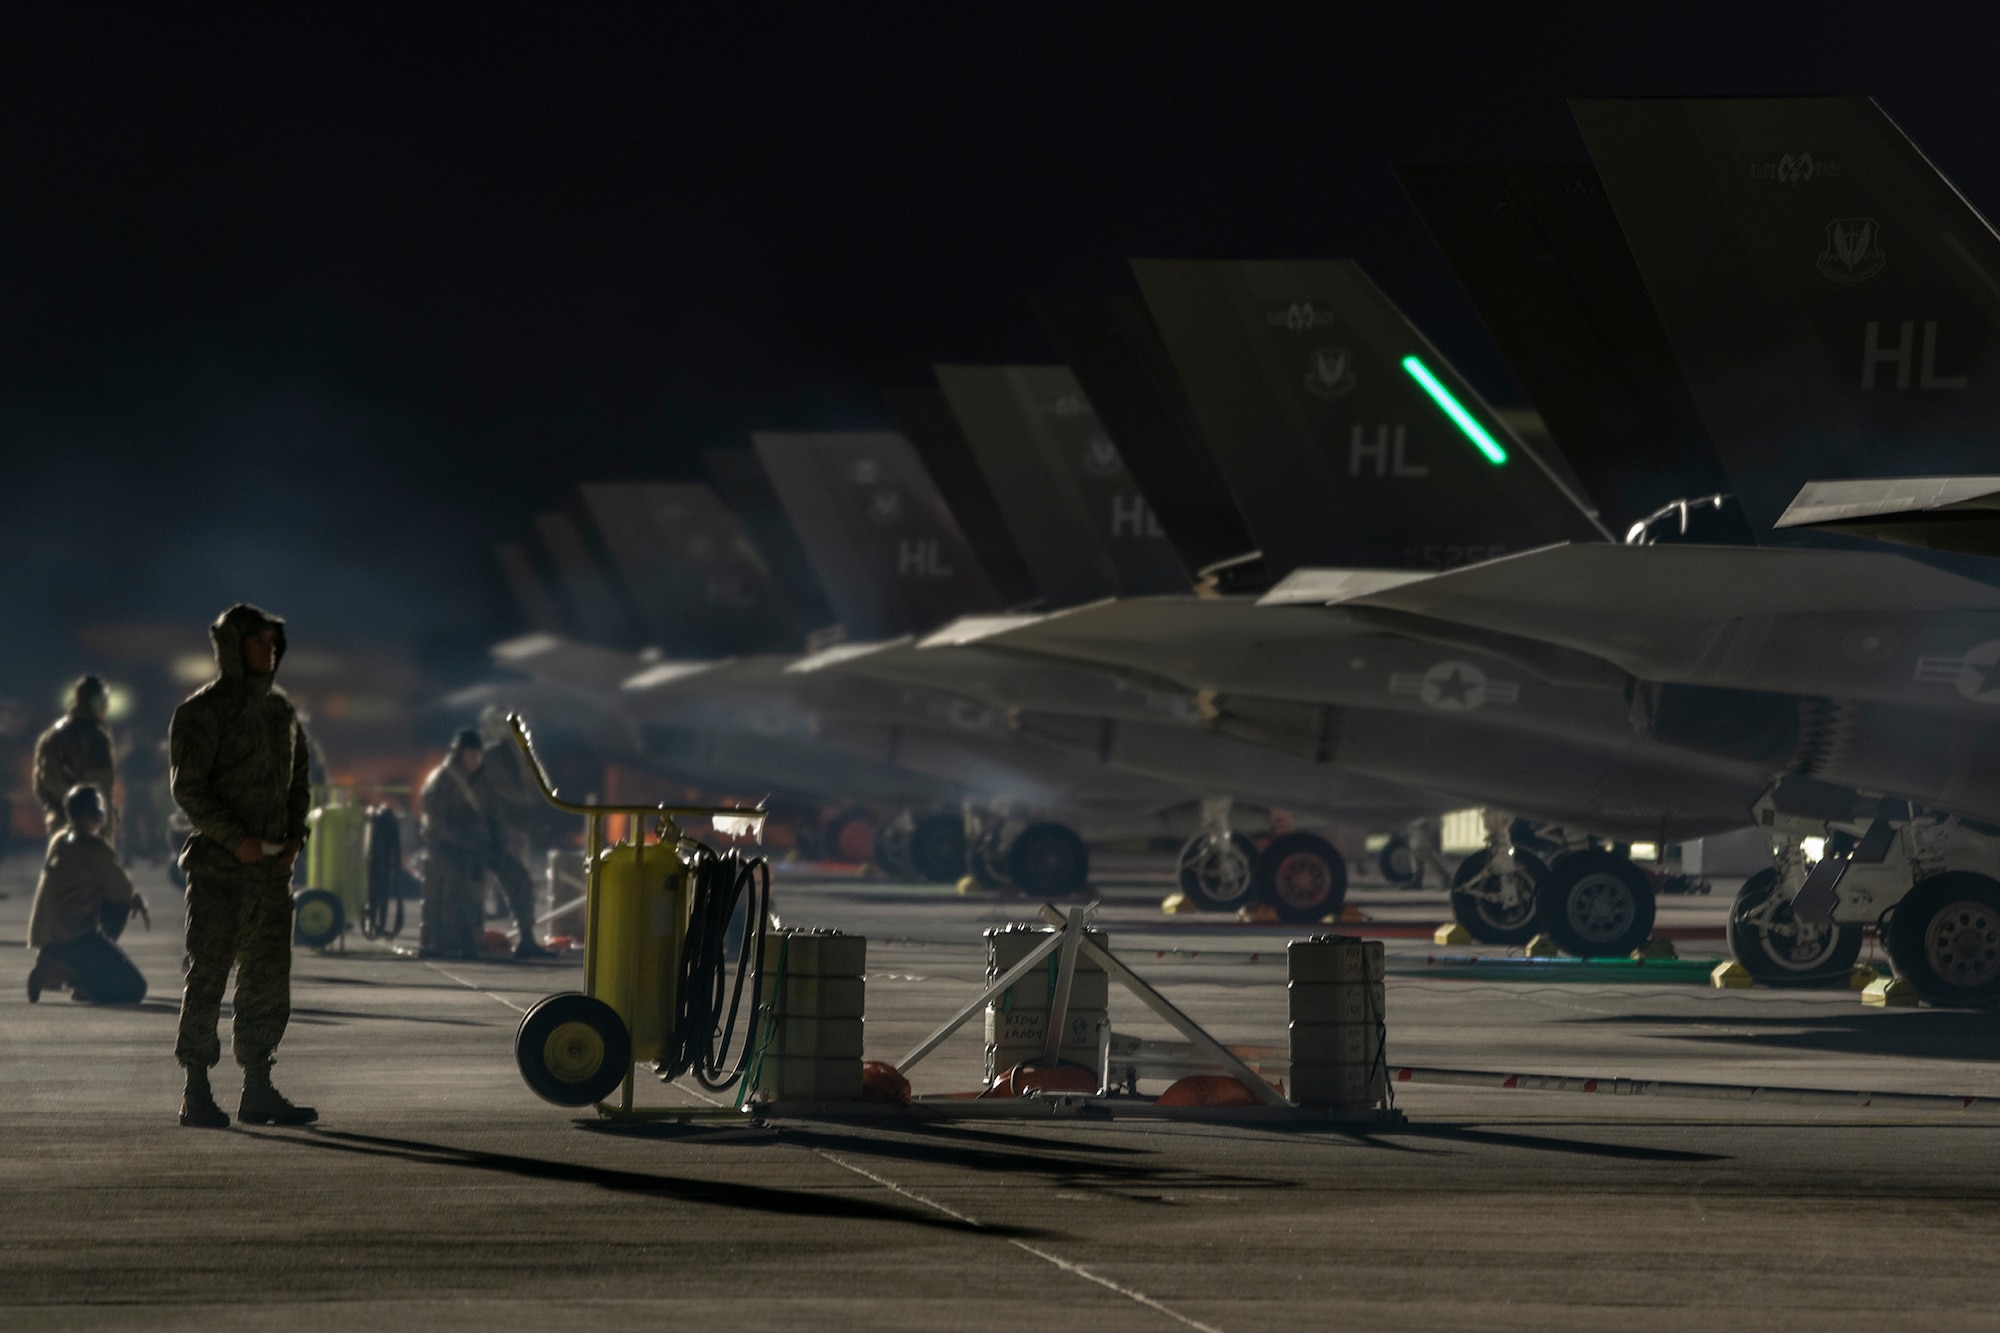 Airmen stand behind a row of F-35A Lightning II fighter jets at night.